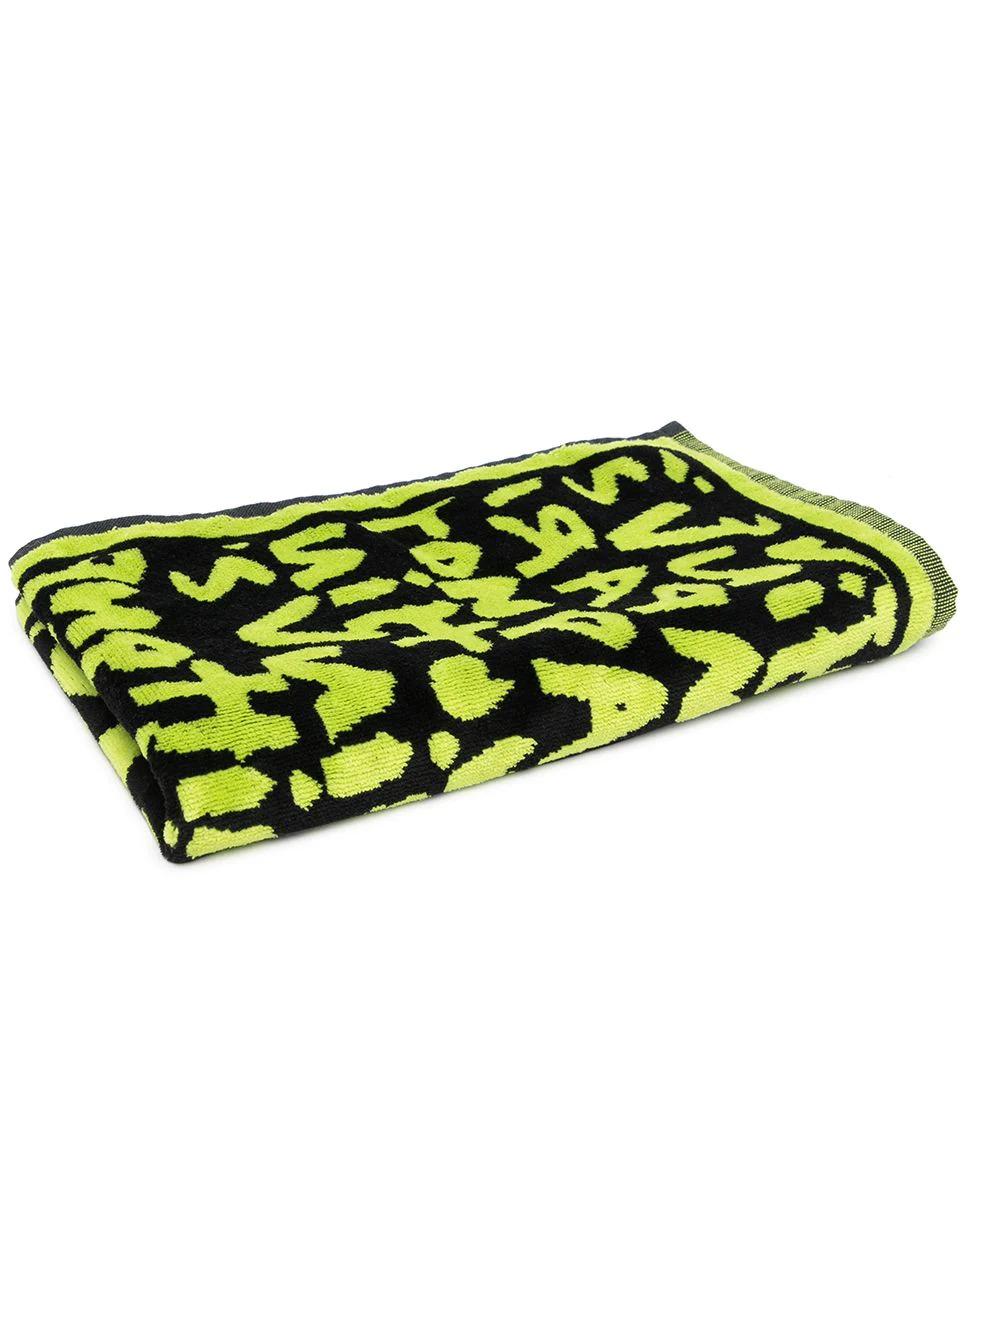 Stand out from the crowd with this Louis Vuitton x Stephen Sprouse Pre-owned Graffiti-print towel. The graffiti design is a combination of black and neon green displaying the 'Louis Vuitton Paris' logo print. Crafted from 100% cotton, this towel is